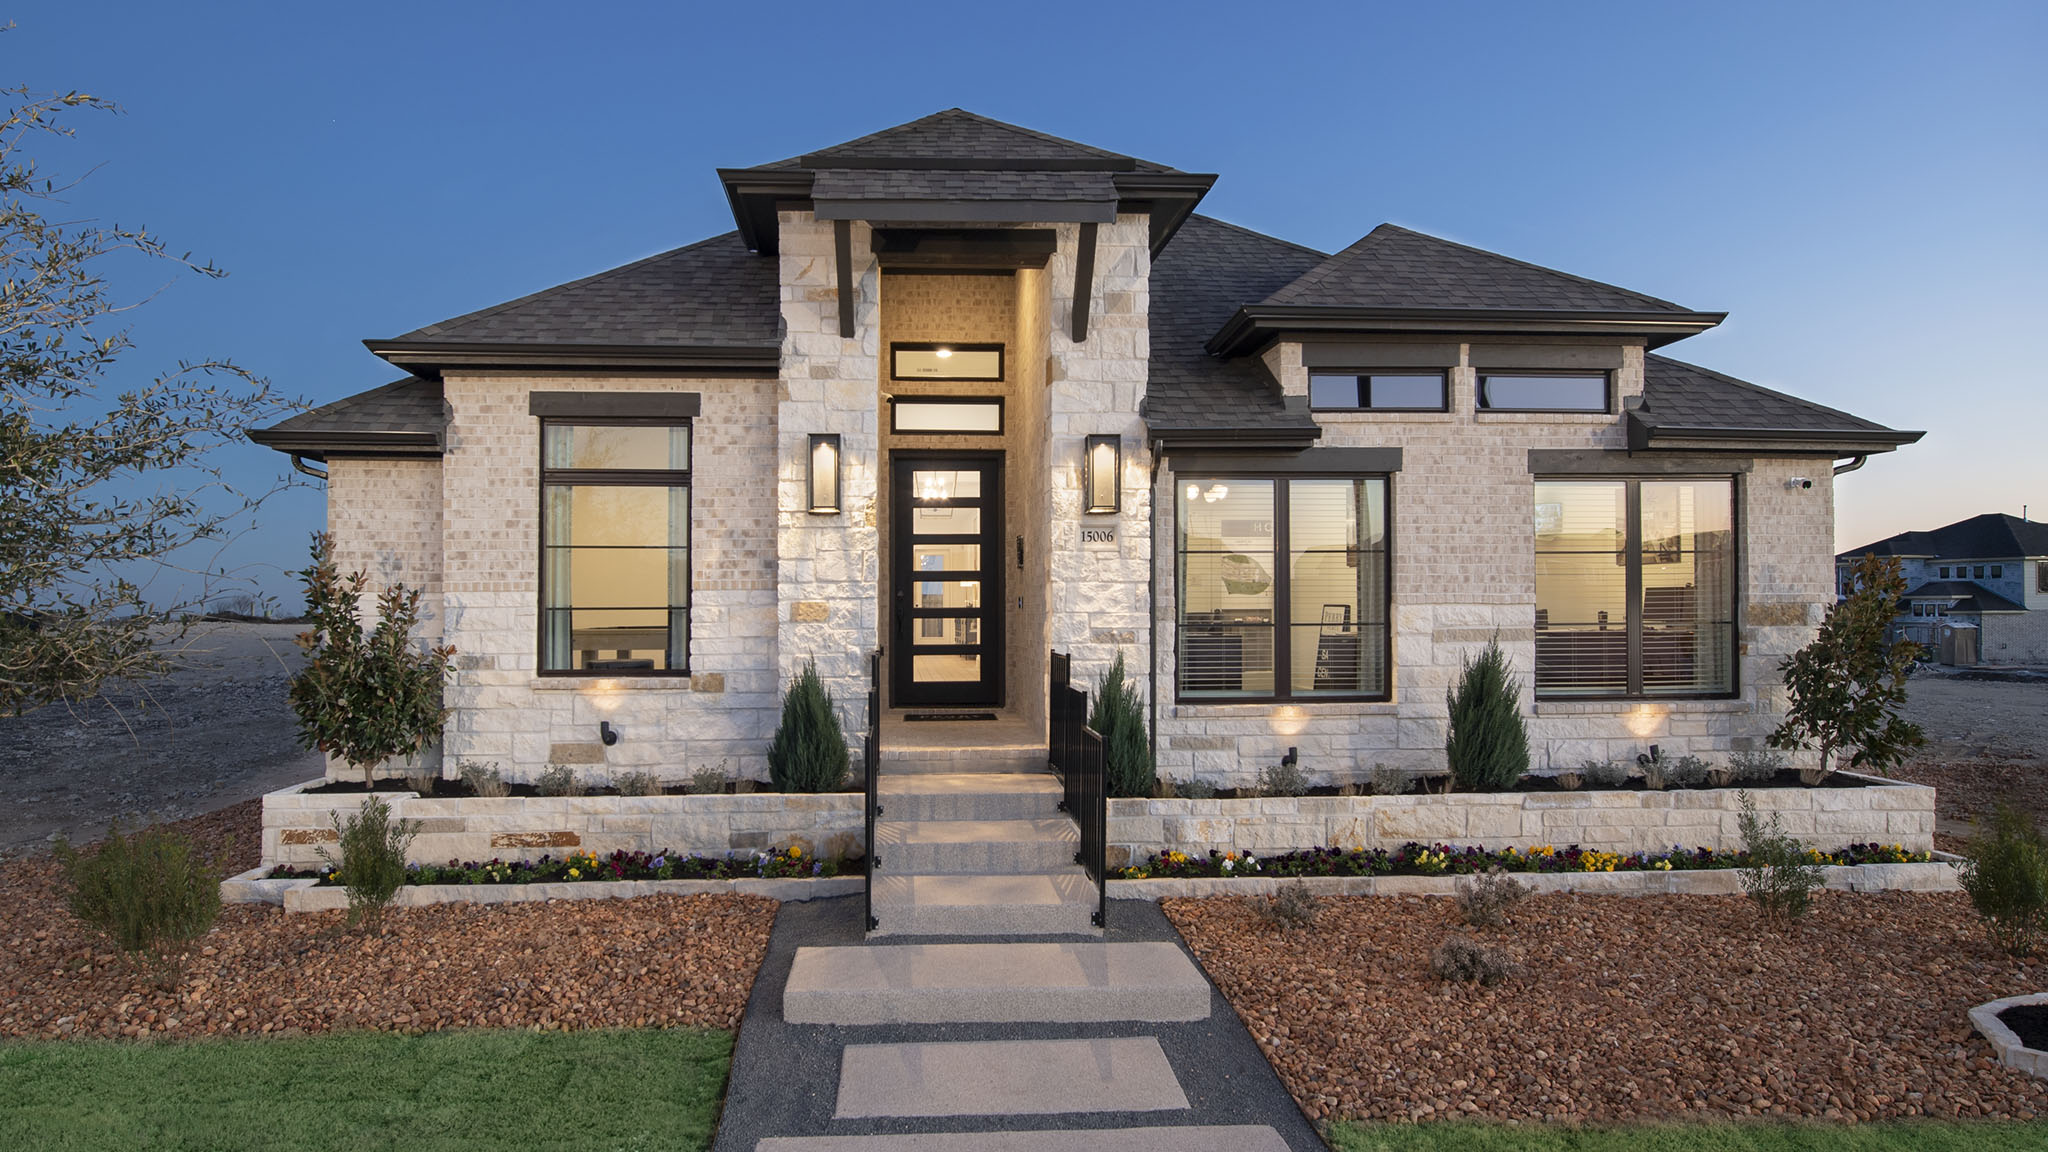 Modern single-story house with stone facade at dusk in New Braunfels.